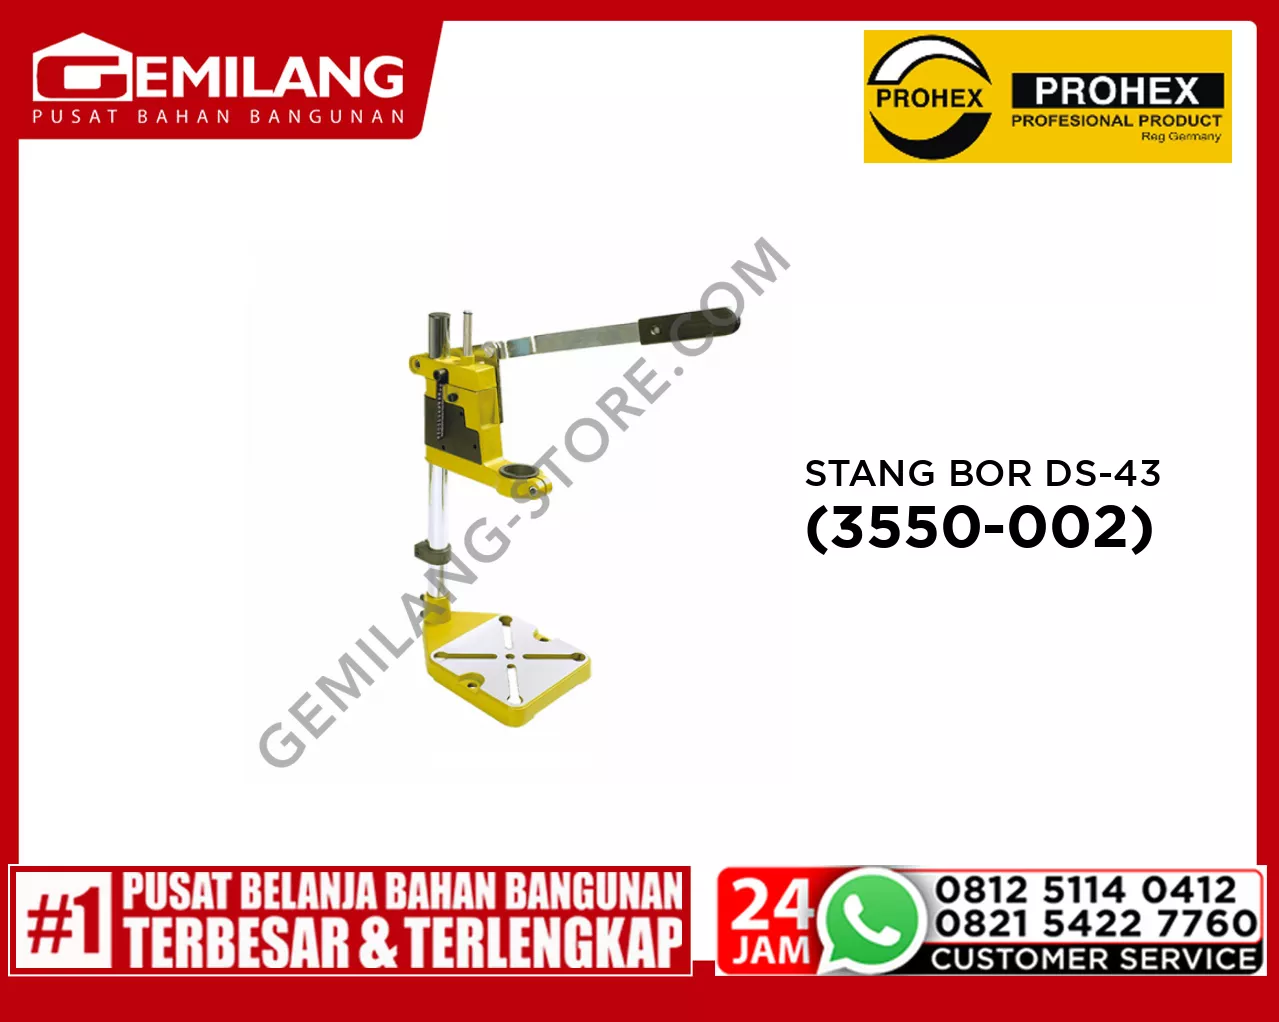 PROHEX STANG BOR DS-43 (3550-002)